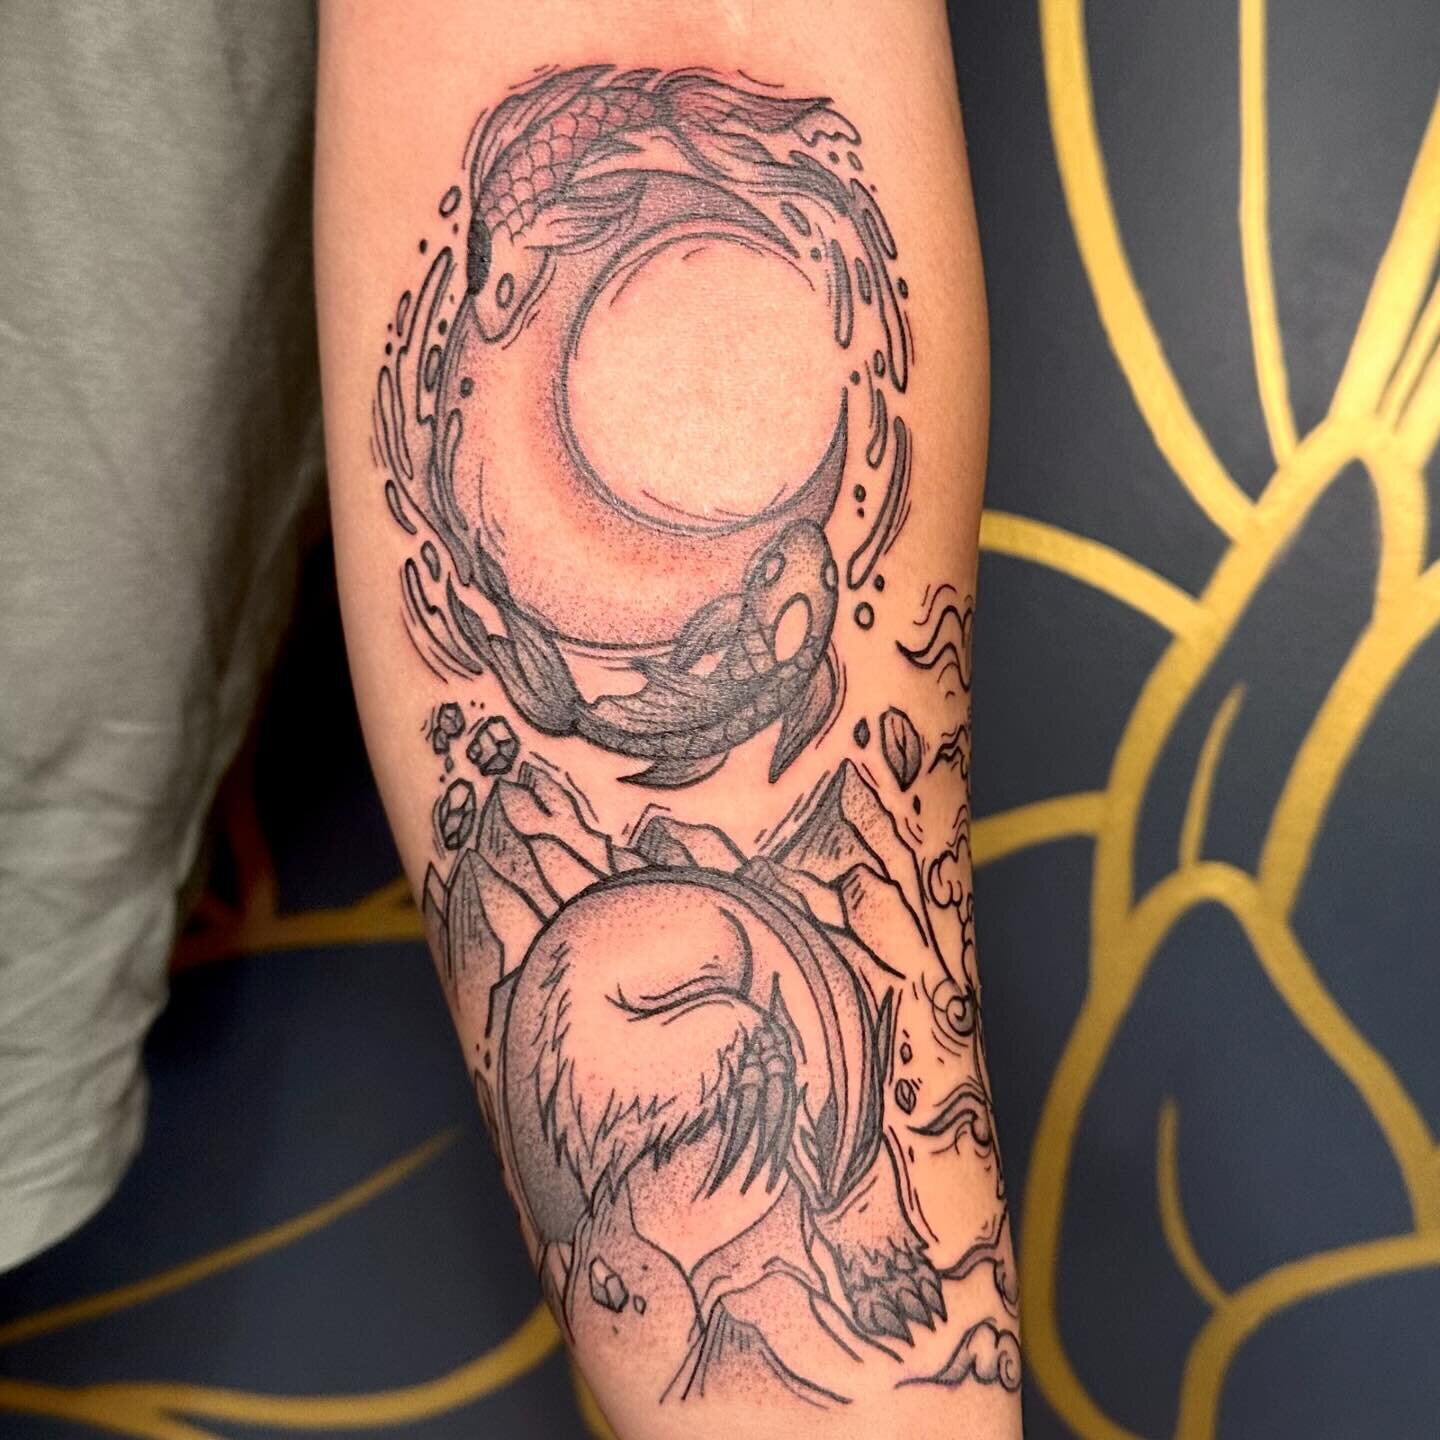 Building a fun ATLA forearm wrap for Majrlo ✨ very happy with what we got done, excited to finish next time!
.
.
.
#atla #avatarthelastairbender #atlatattoo #anime #animetattoo #animetattoos #yyctattoo #yyctattoos #yycliving #tattoo #flashtattoo #tat